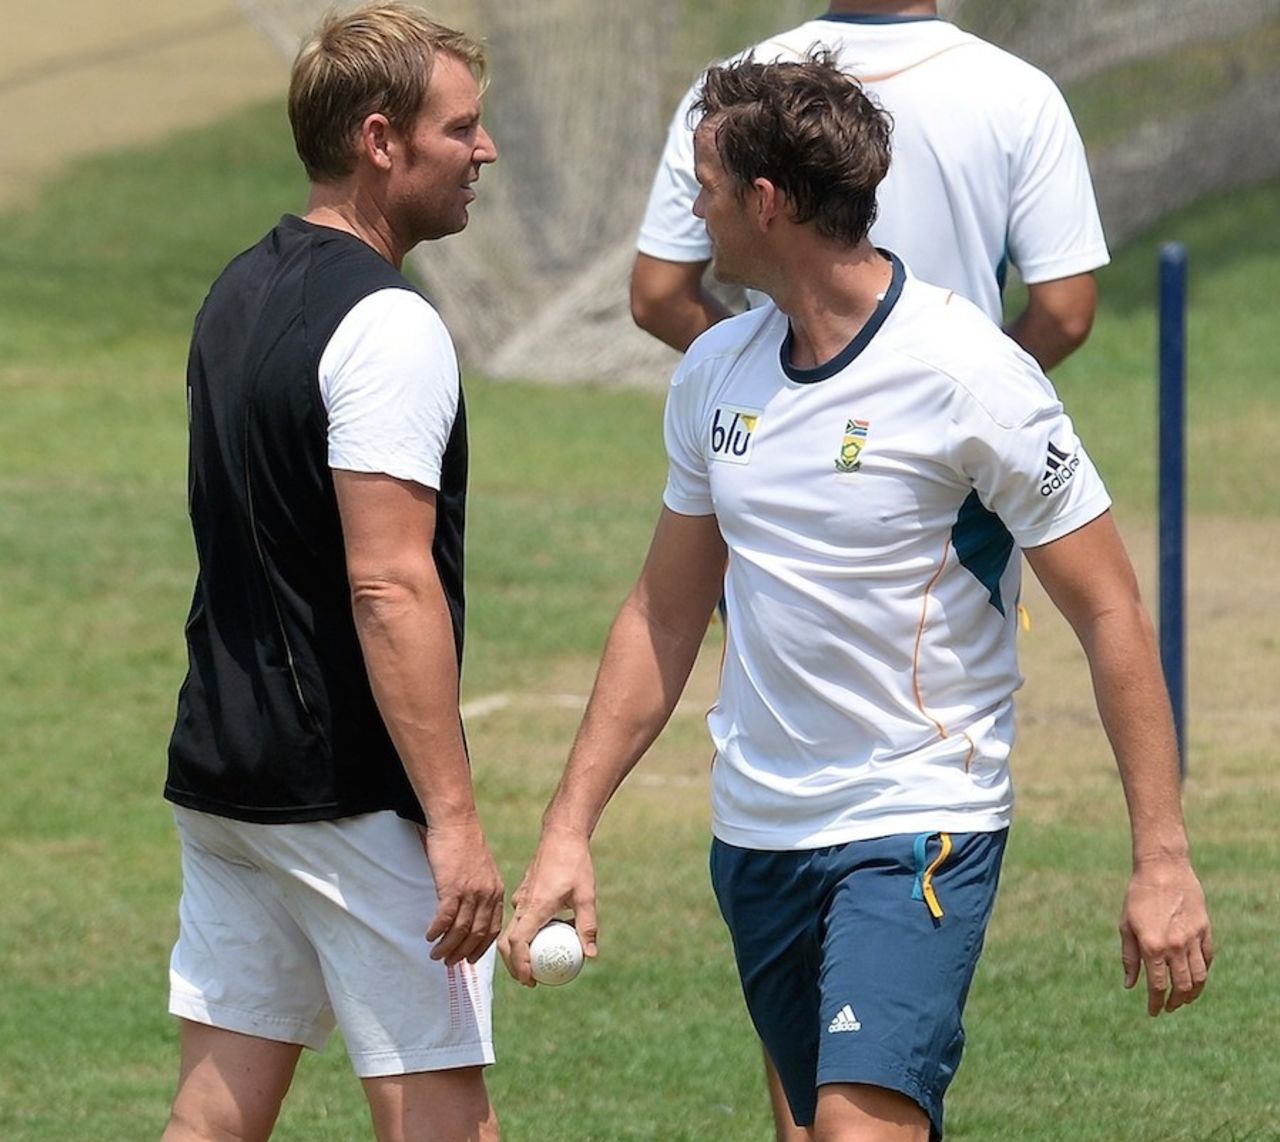 Look who's here: Shane Warne turns up at South Africa nets, Dhaka, April 1, 2014